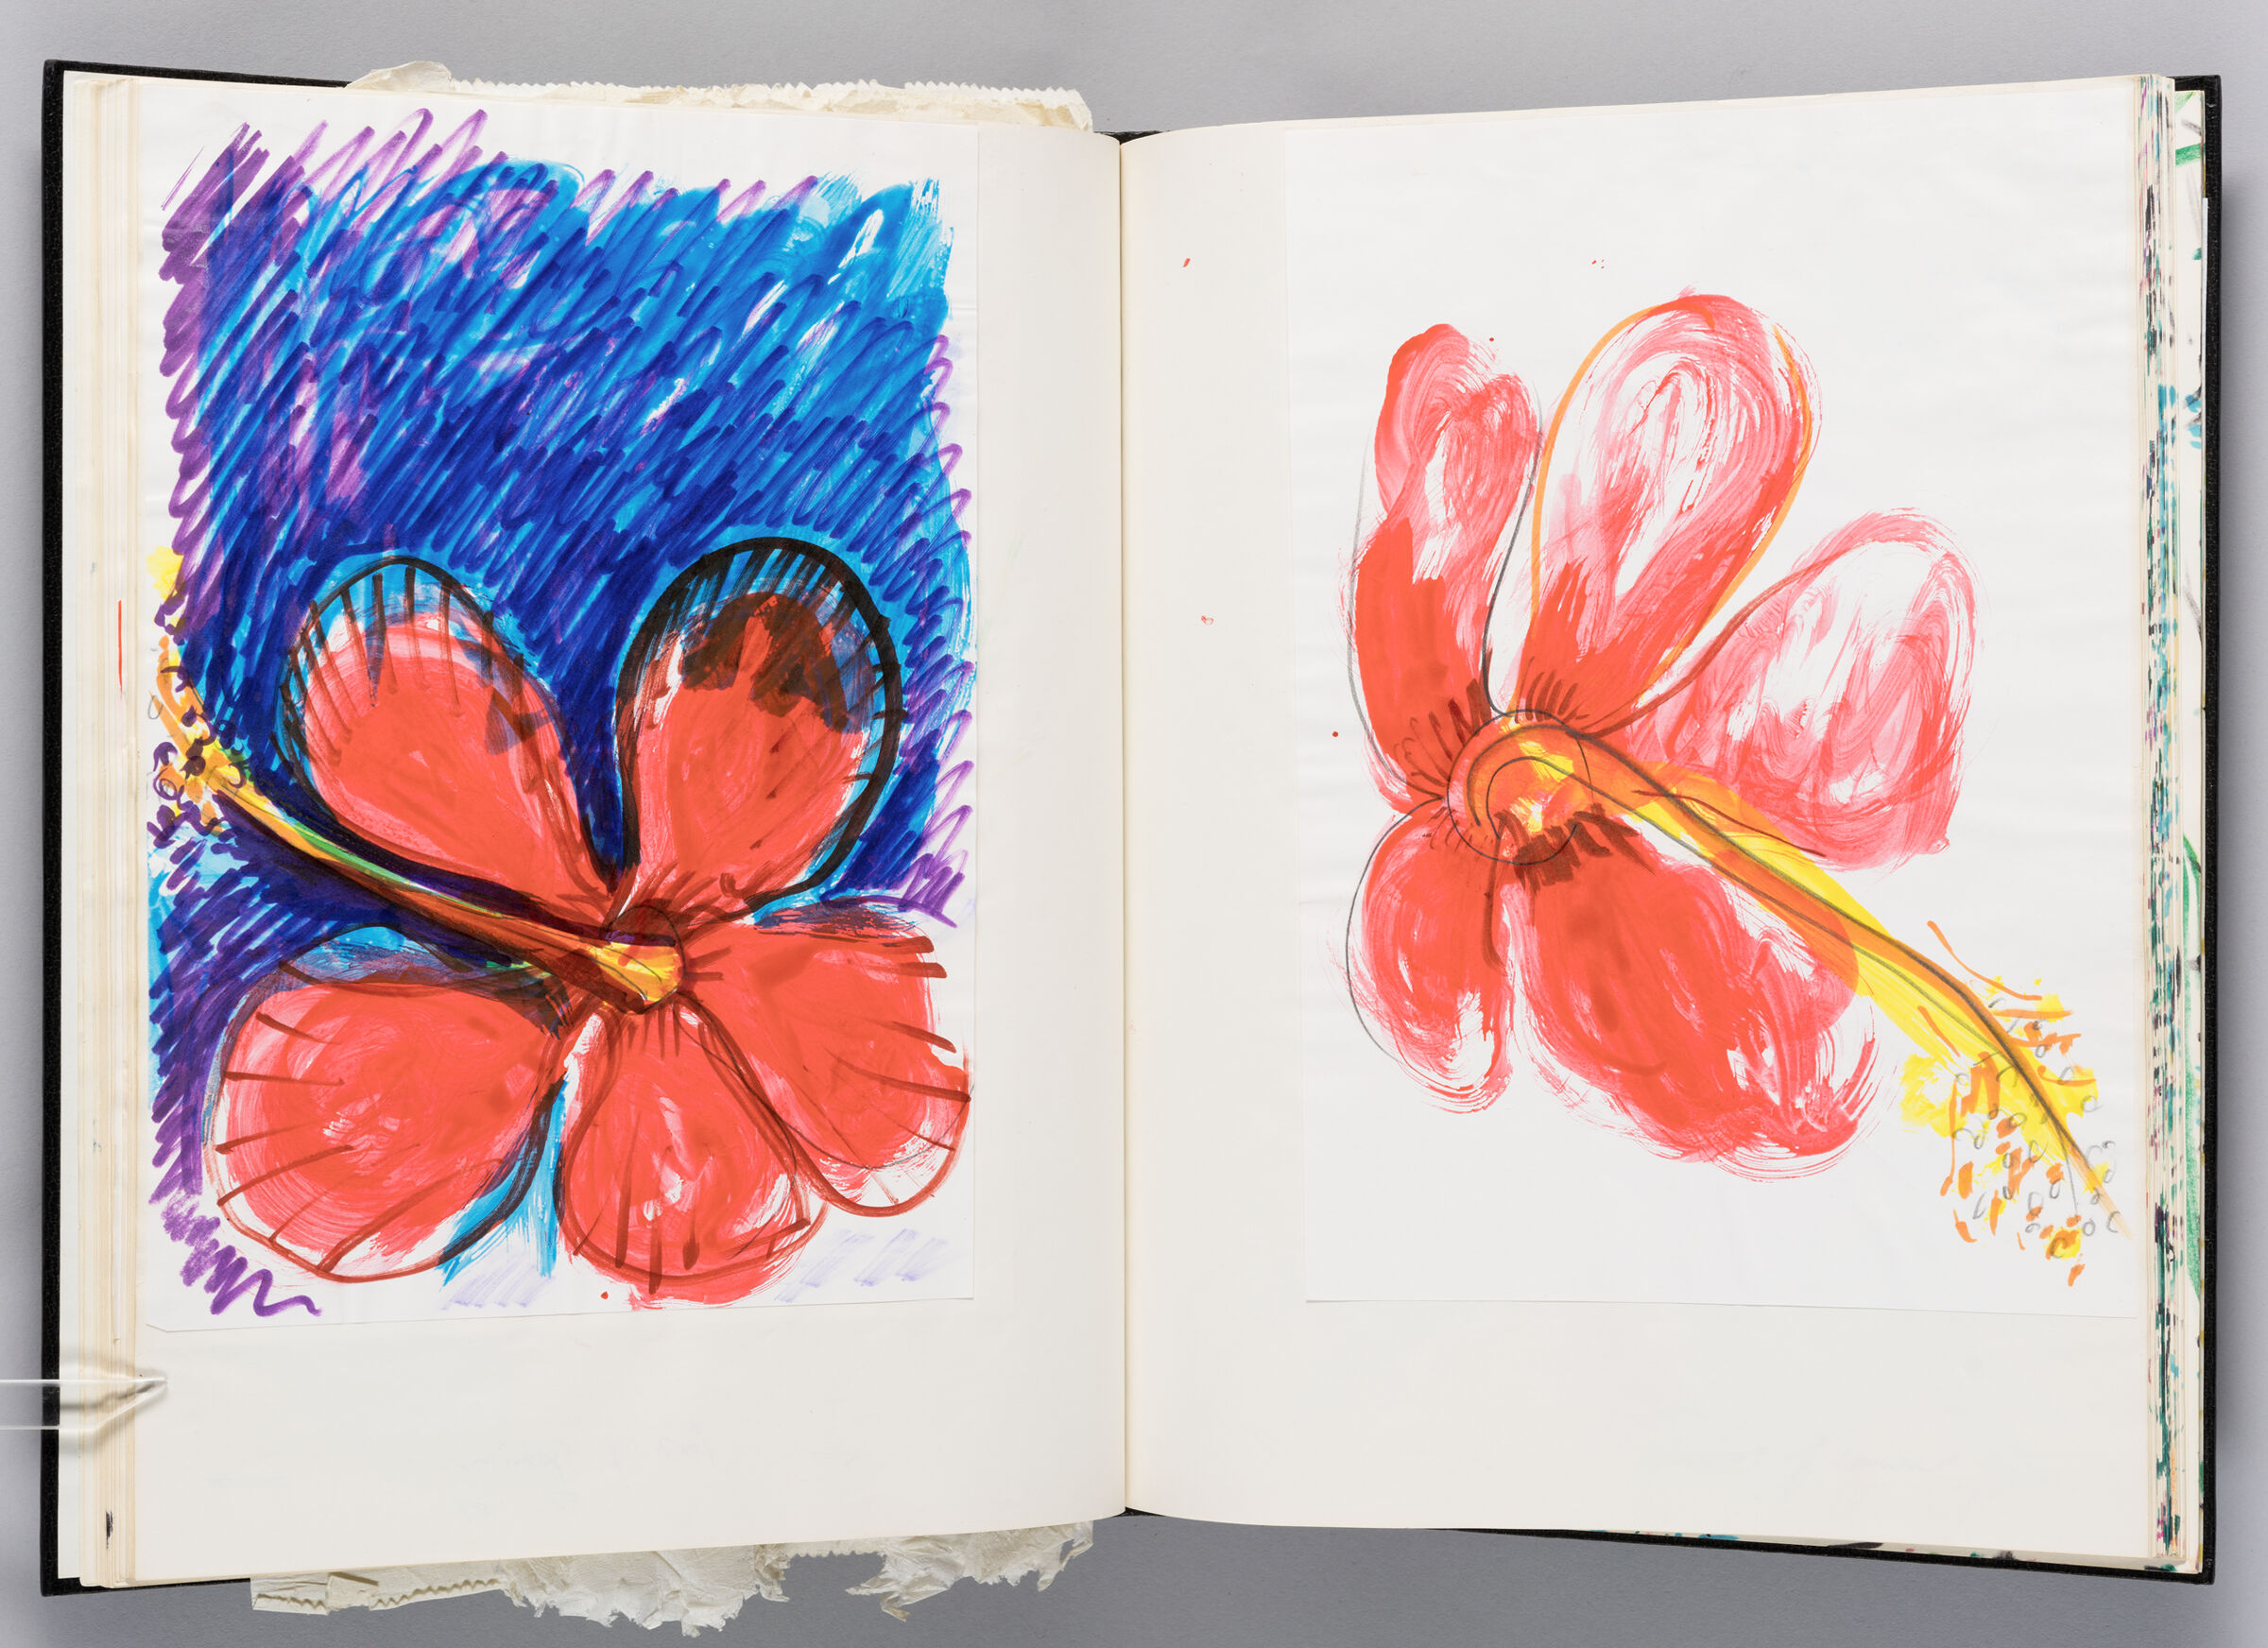 Untitled (Adhered Sketch Of Hibiscus Flower, Left Page); Untitled (Adhered Sketch Of Hibiscus Flower, Right Page)